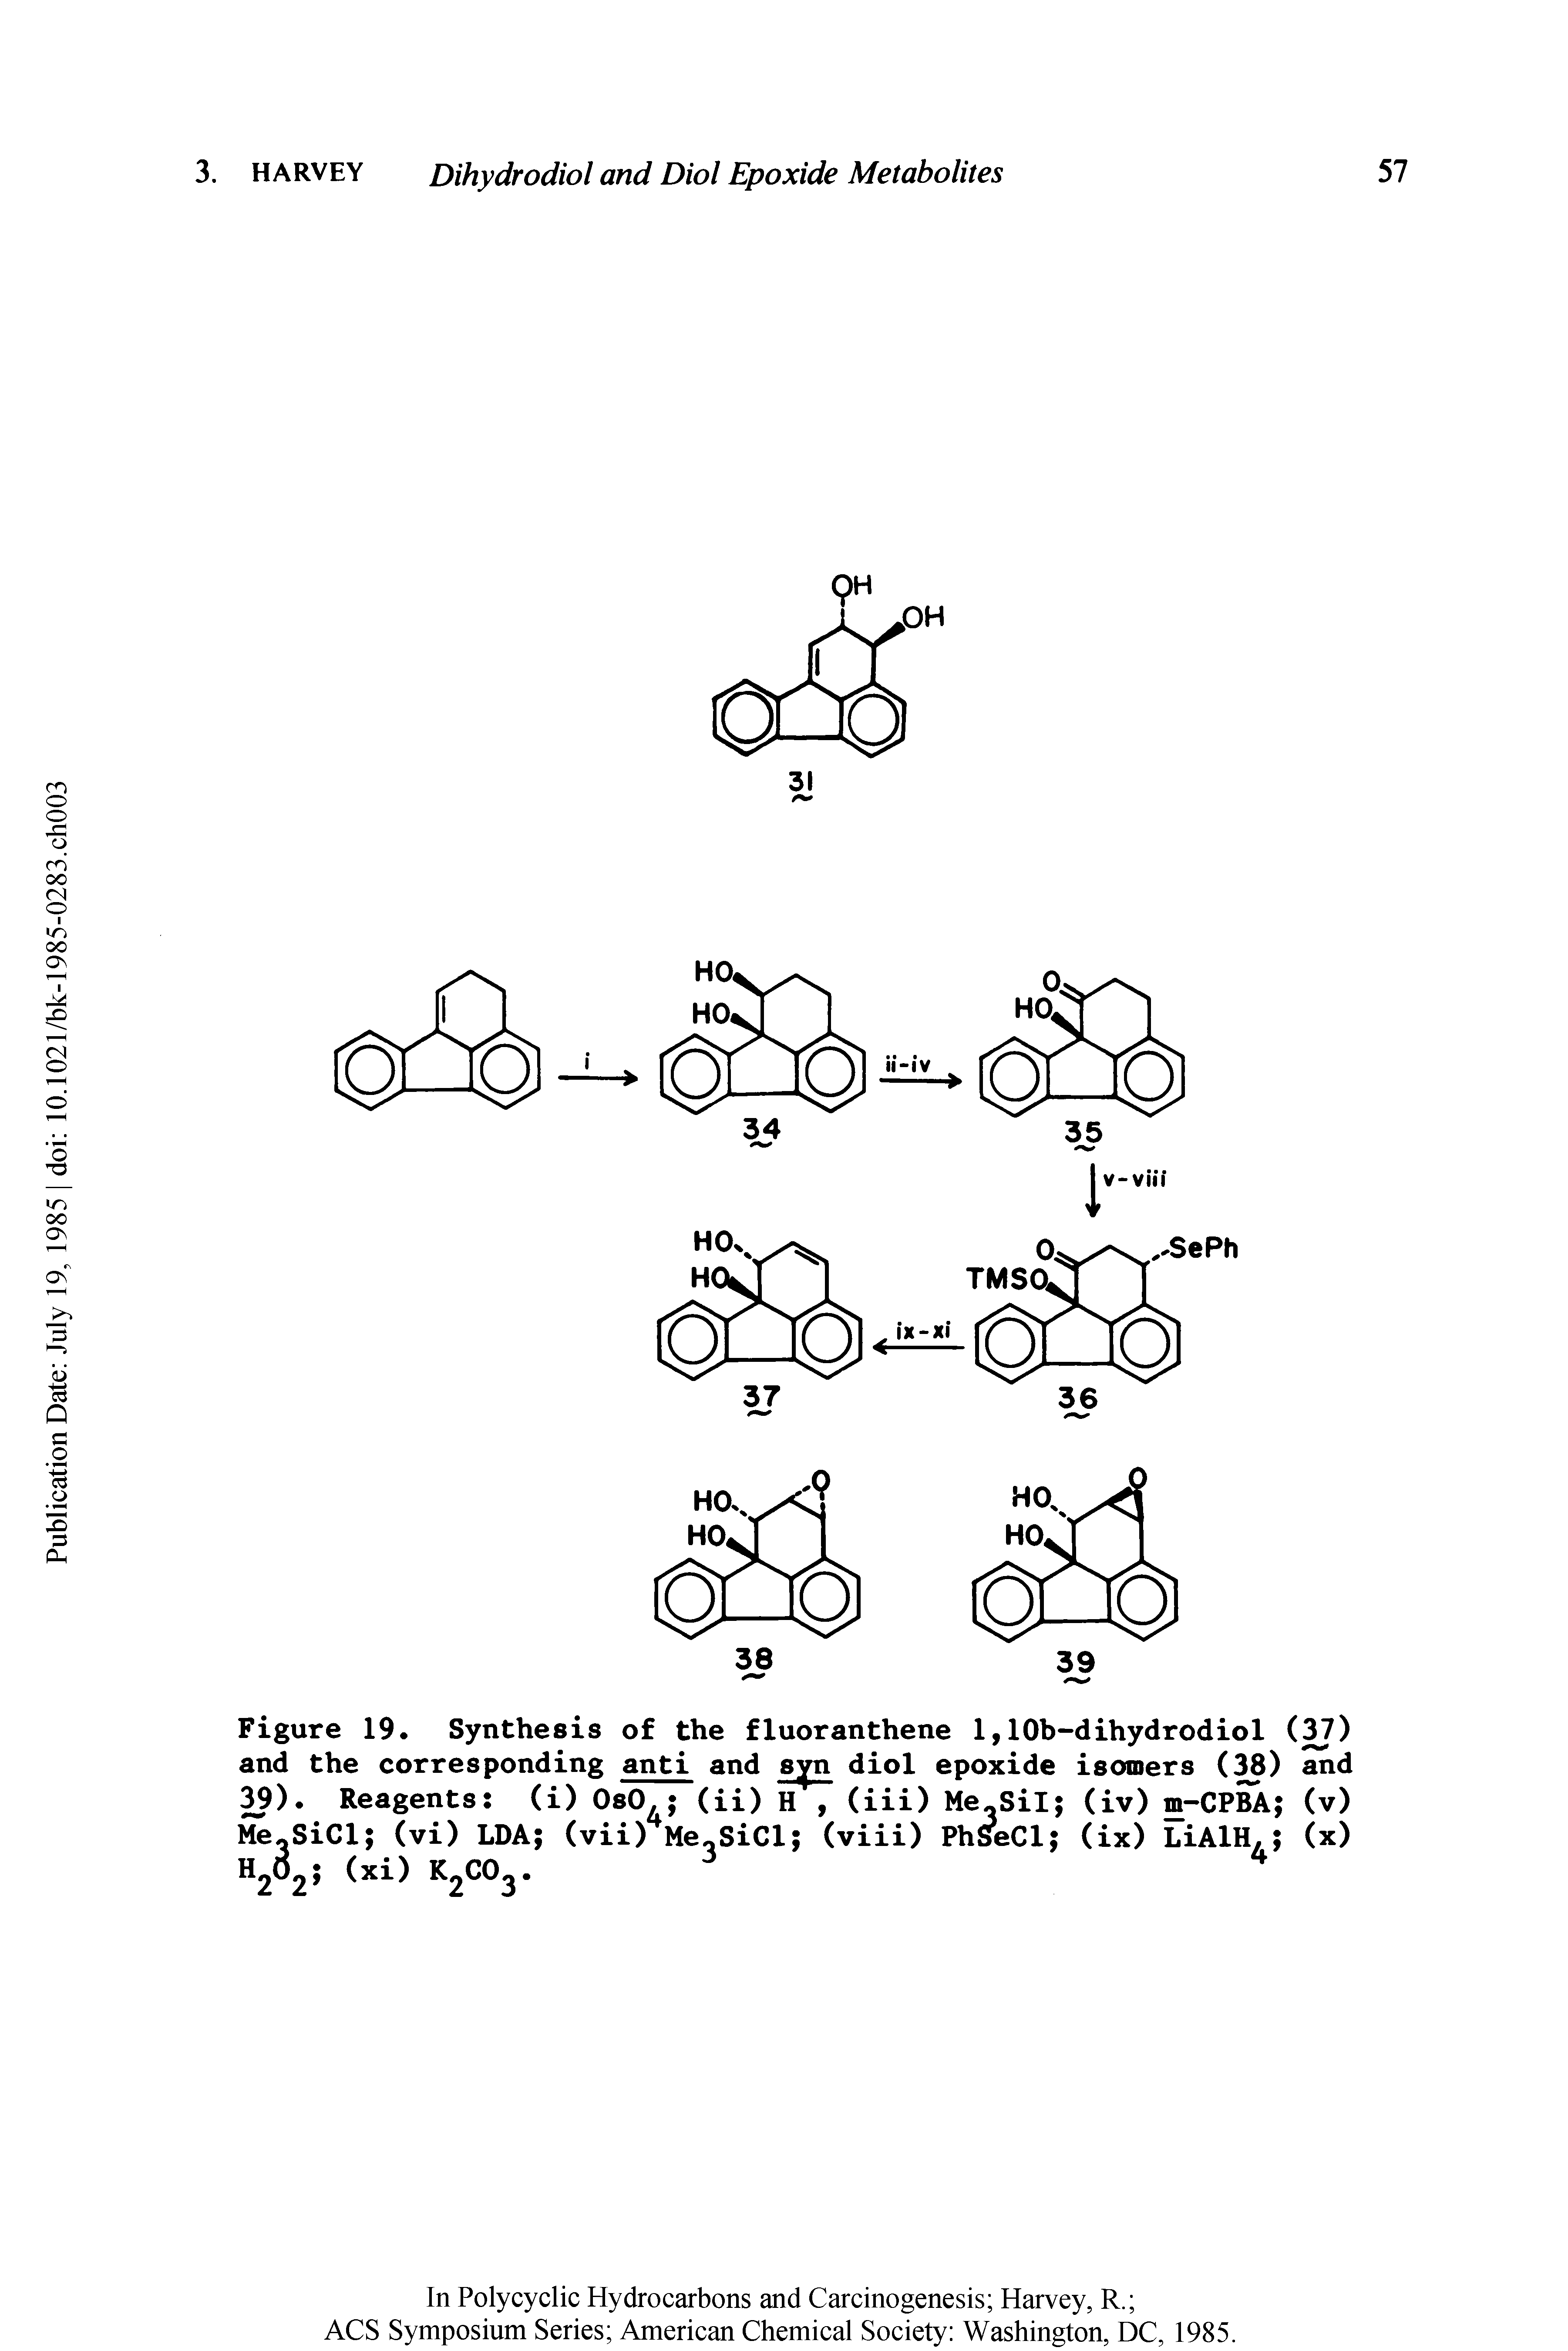 Figure 19. Synthesis of the fluoranthene 1,lOb-dihydrodiol (37) and the corresponding anti and syn diol epoxide isomers (38) and 39). Reagents (i) OsO, (ii) H, (iii) Me Sil (iv) m-CPBA (v) Me SiCl (vi) LDA (vii) Me SiCl (viii) PhSeCl (ix) LiAlH, (x) H2325 (xi) K2C03.